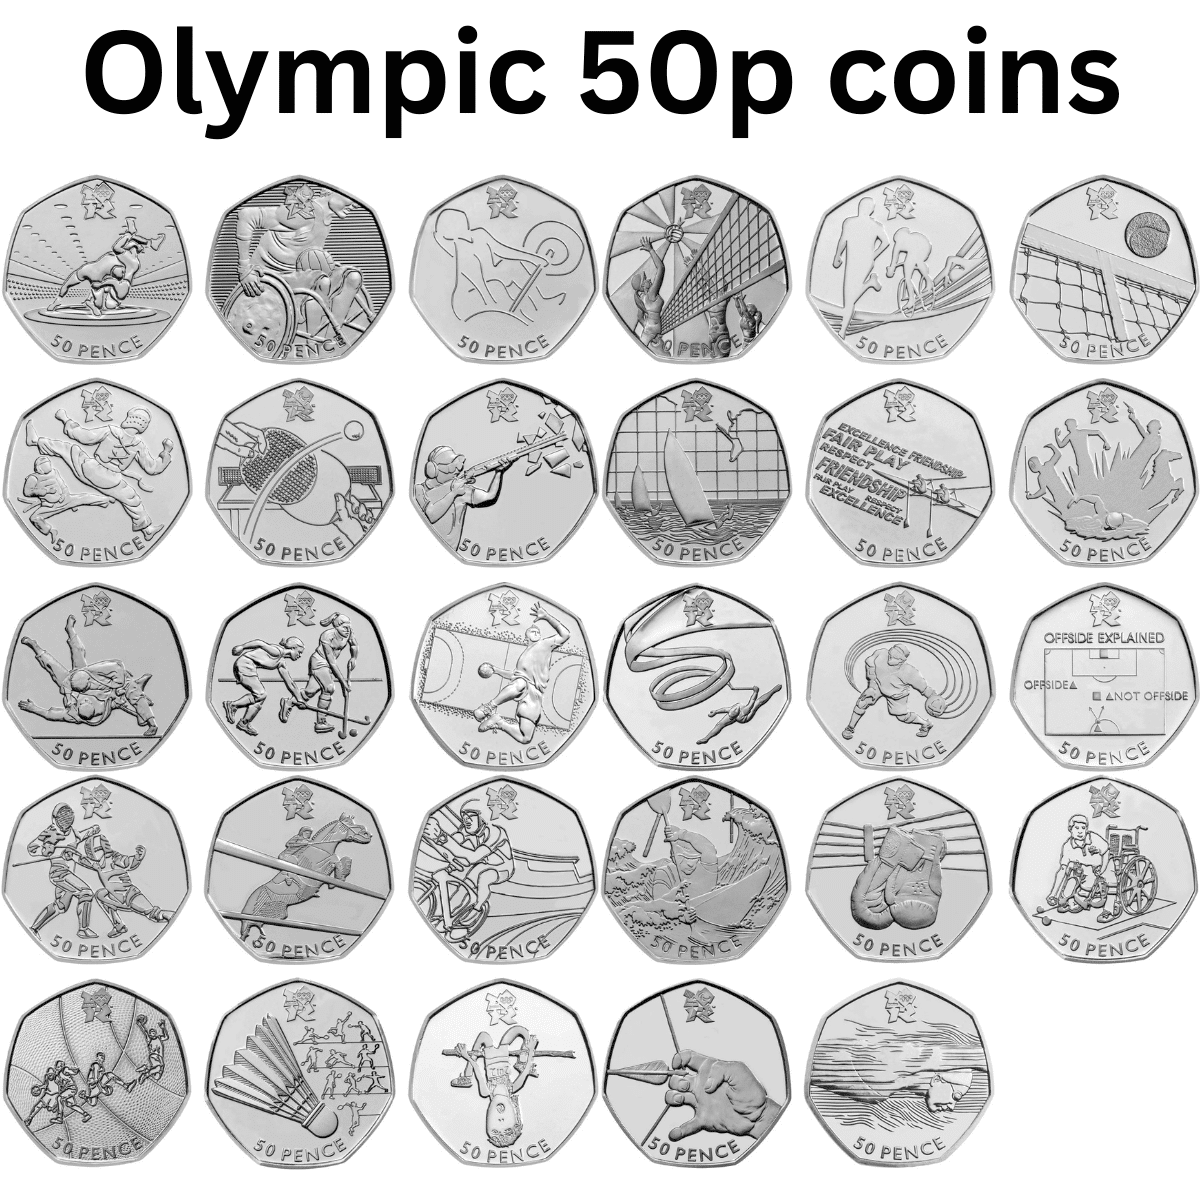 Olympic 50p coins pictures